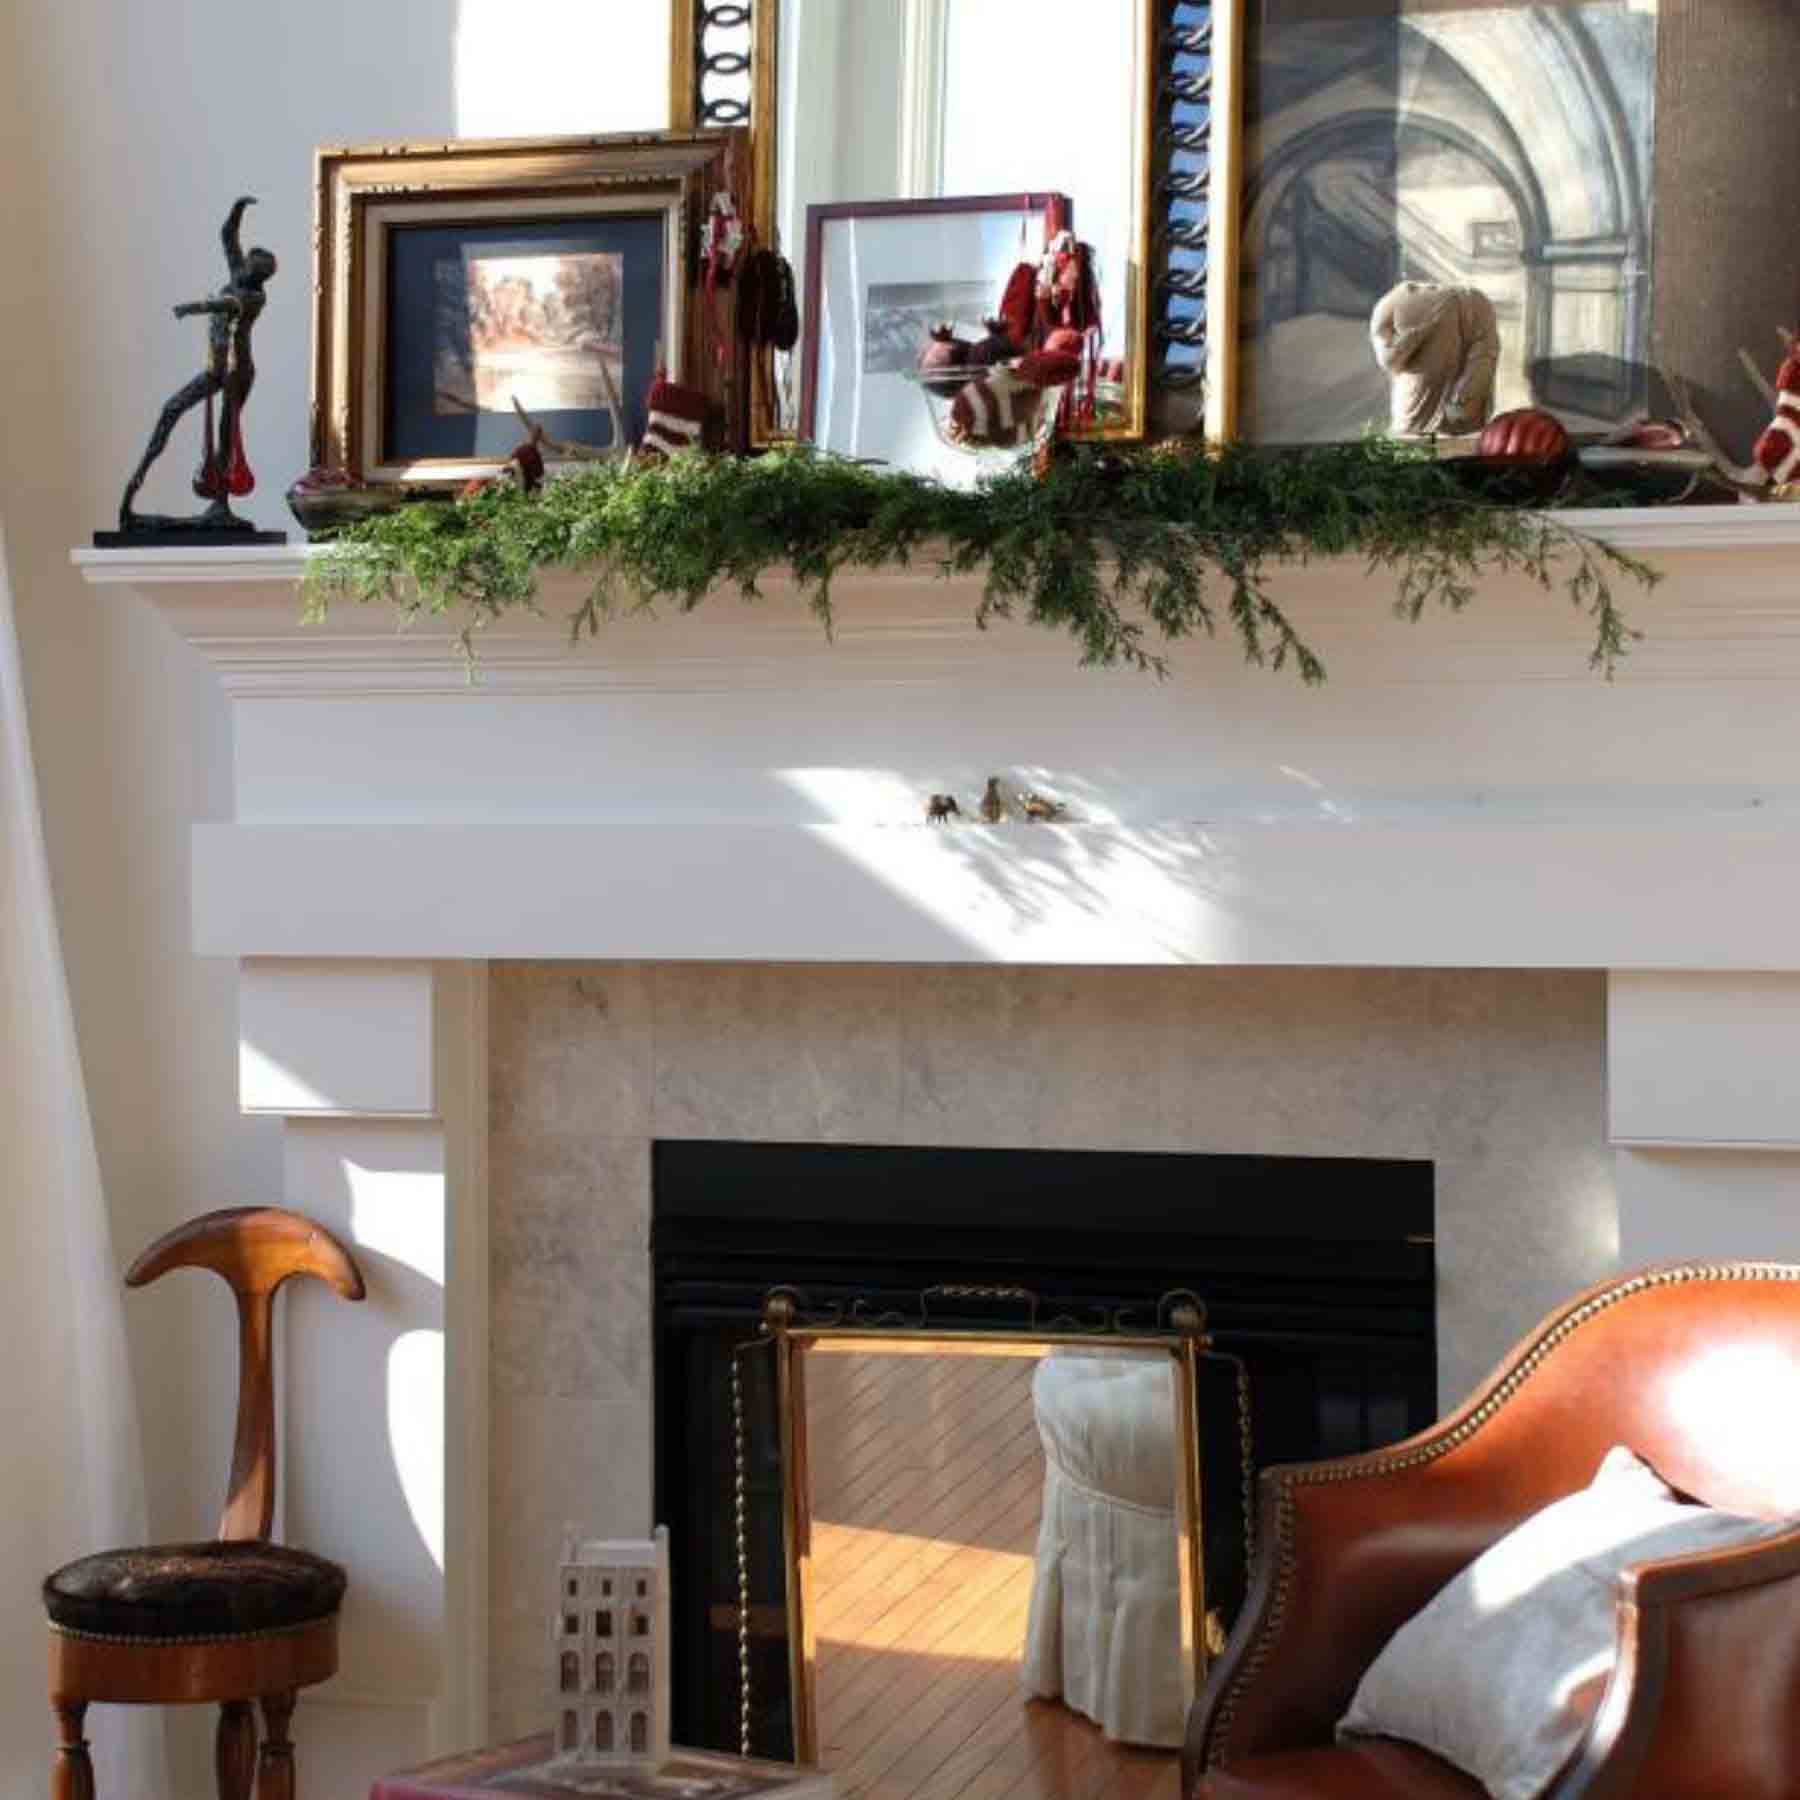 transform fireplace into focal point for family moments with pillows and blankets